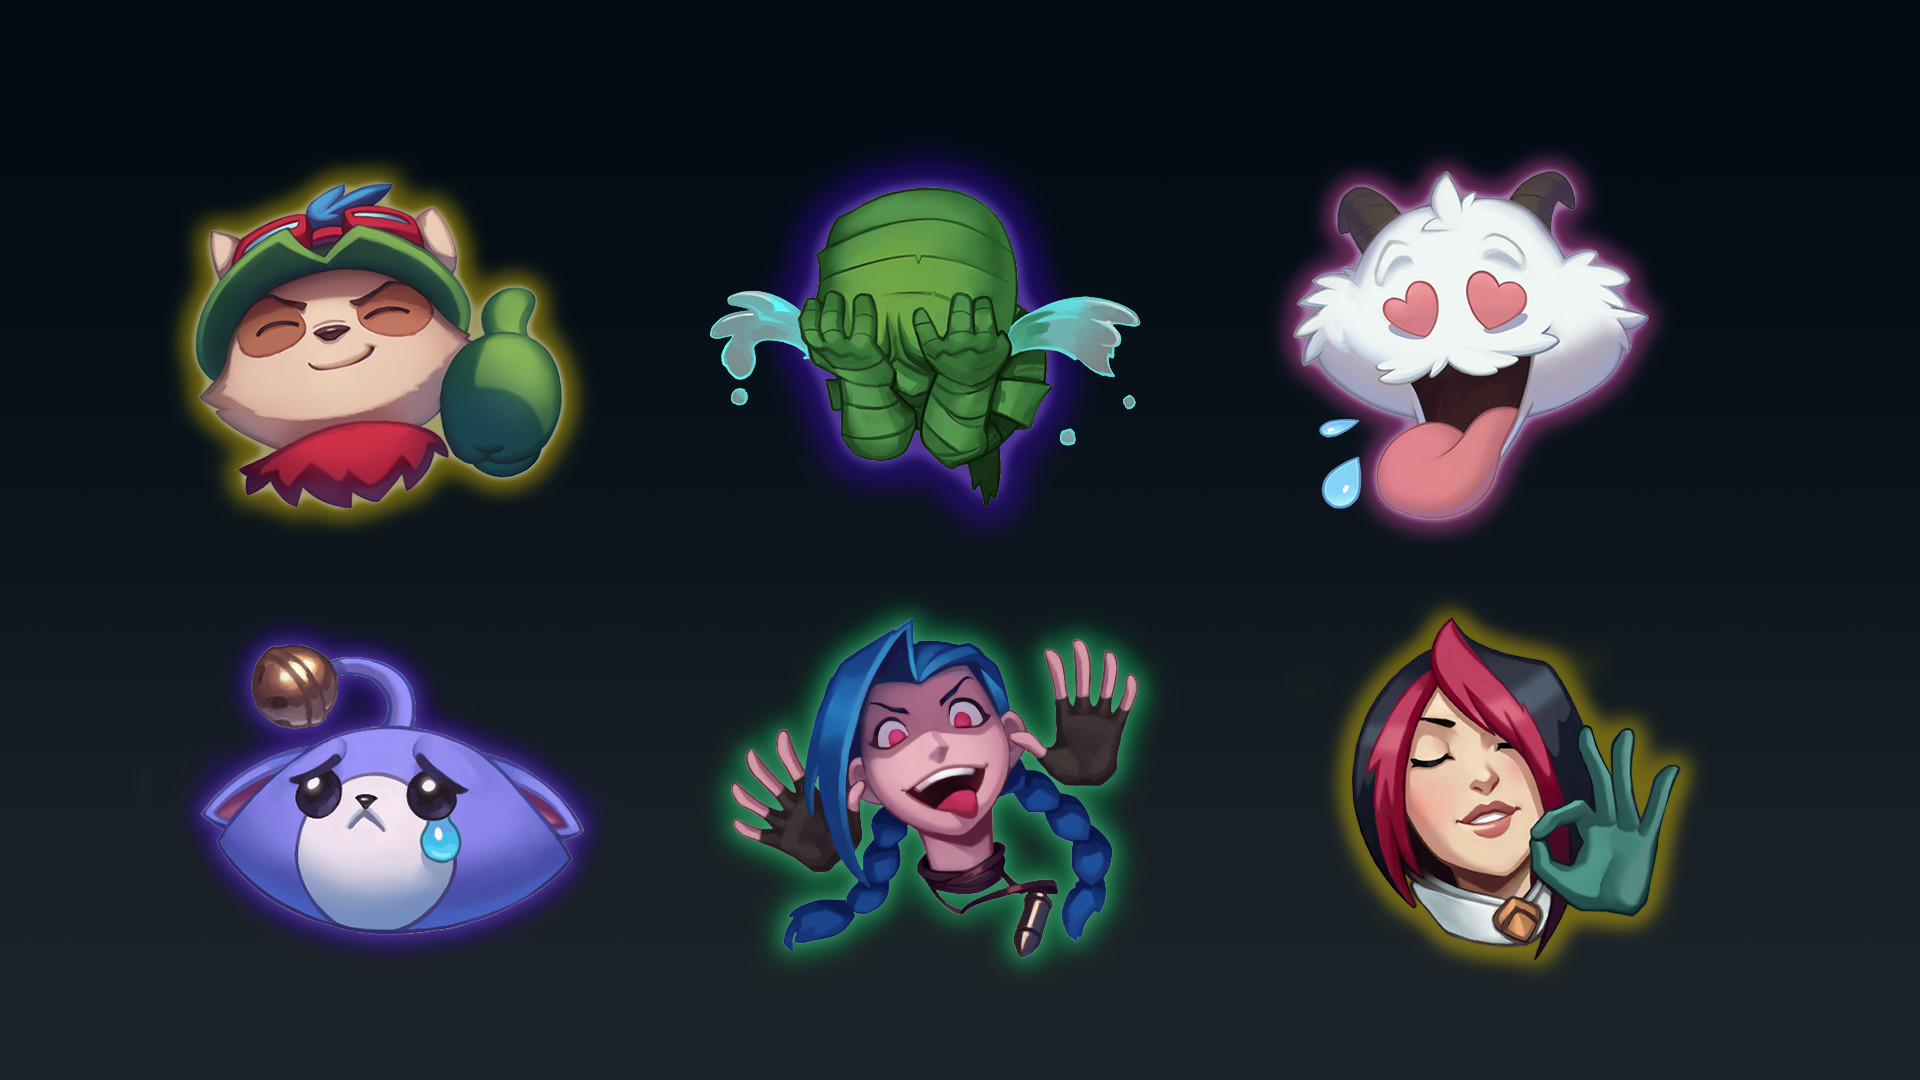 Download Hd Cat Wallpapers Tumblr - League Of Legends Emoji In Game , HD Wallpaper & Backgrounds